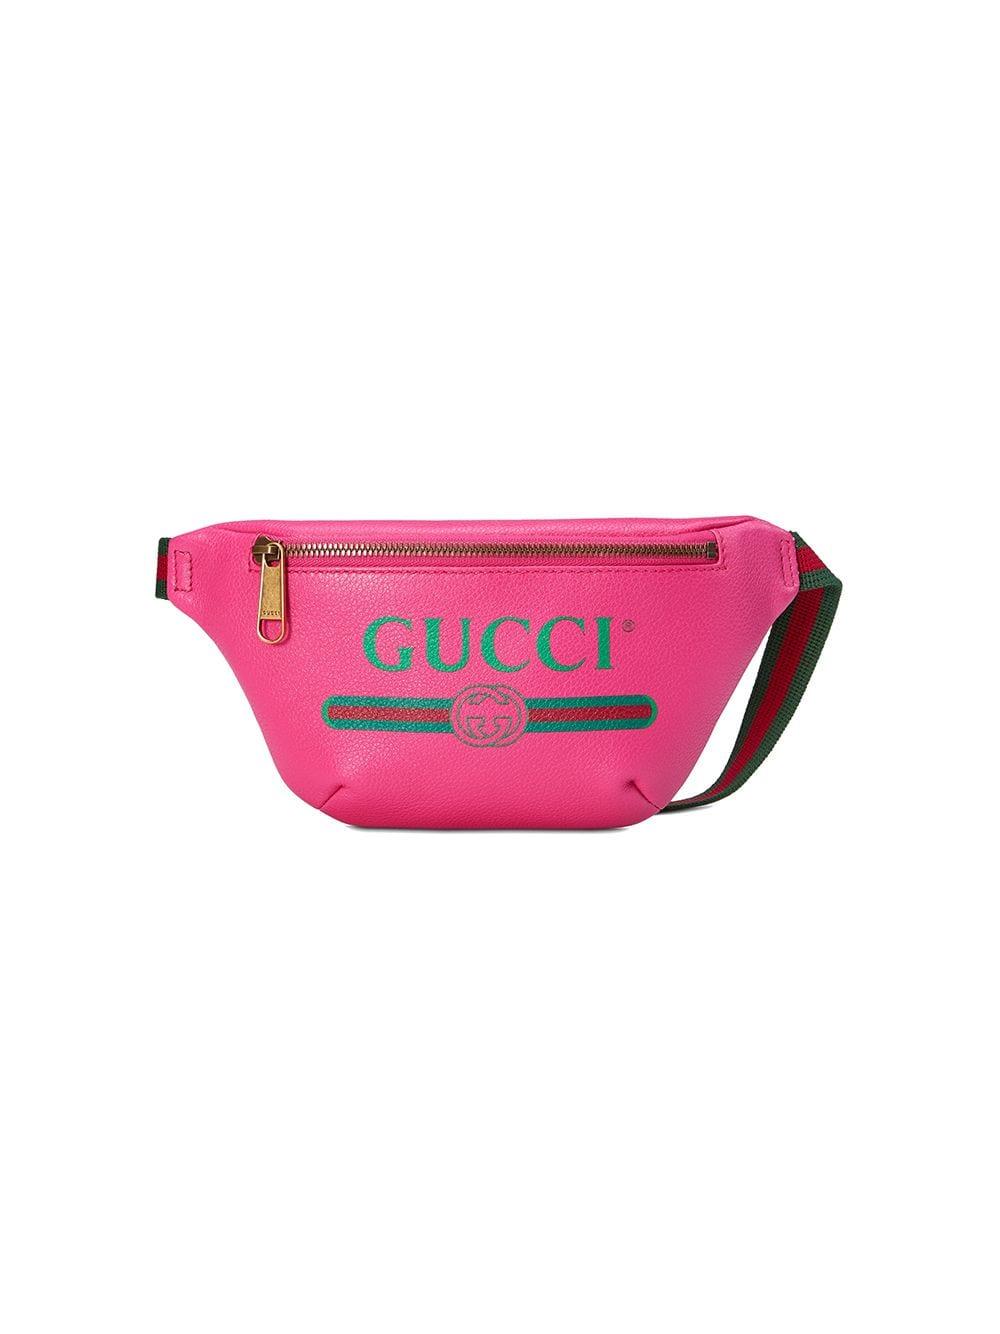 Gucci Leather Print Small Belt Bag in Pink | Lyst